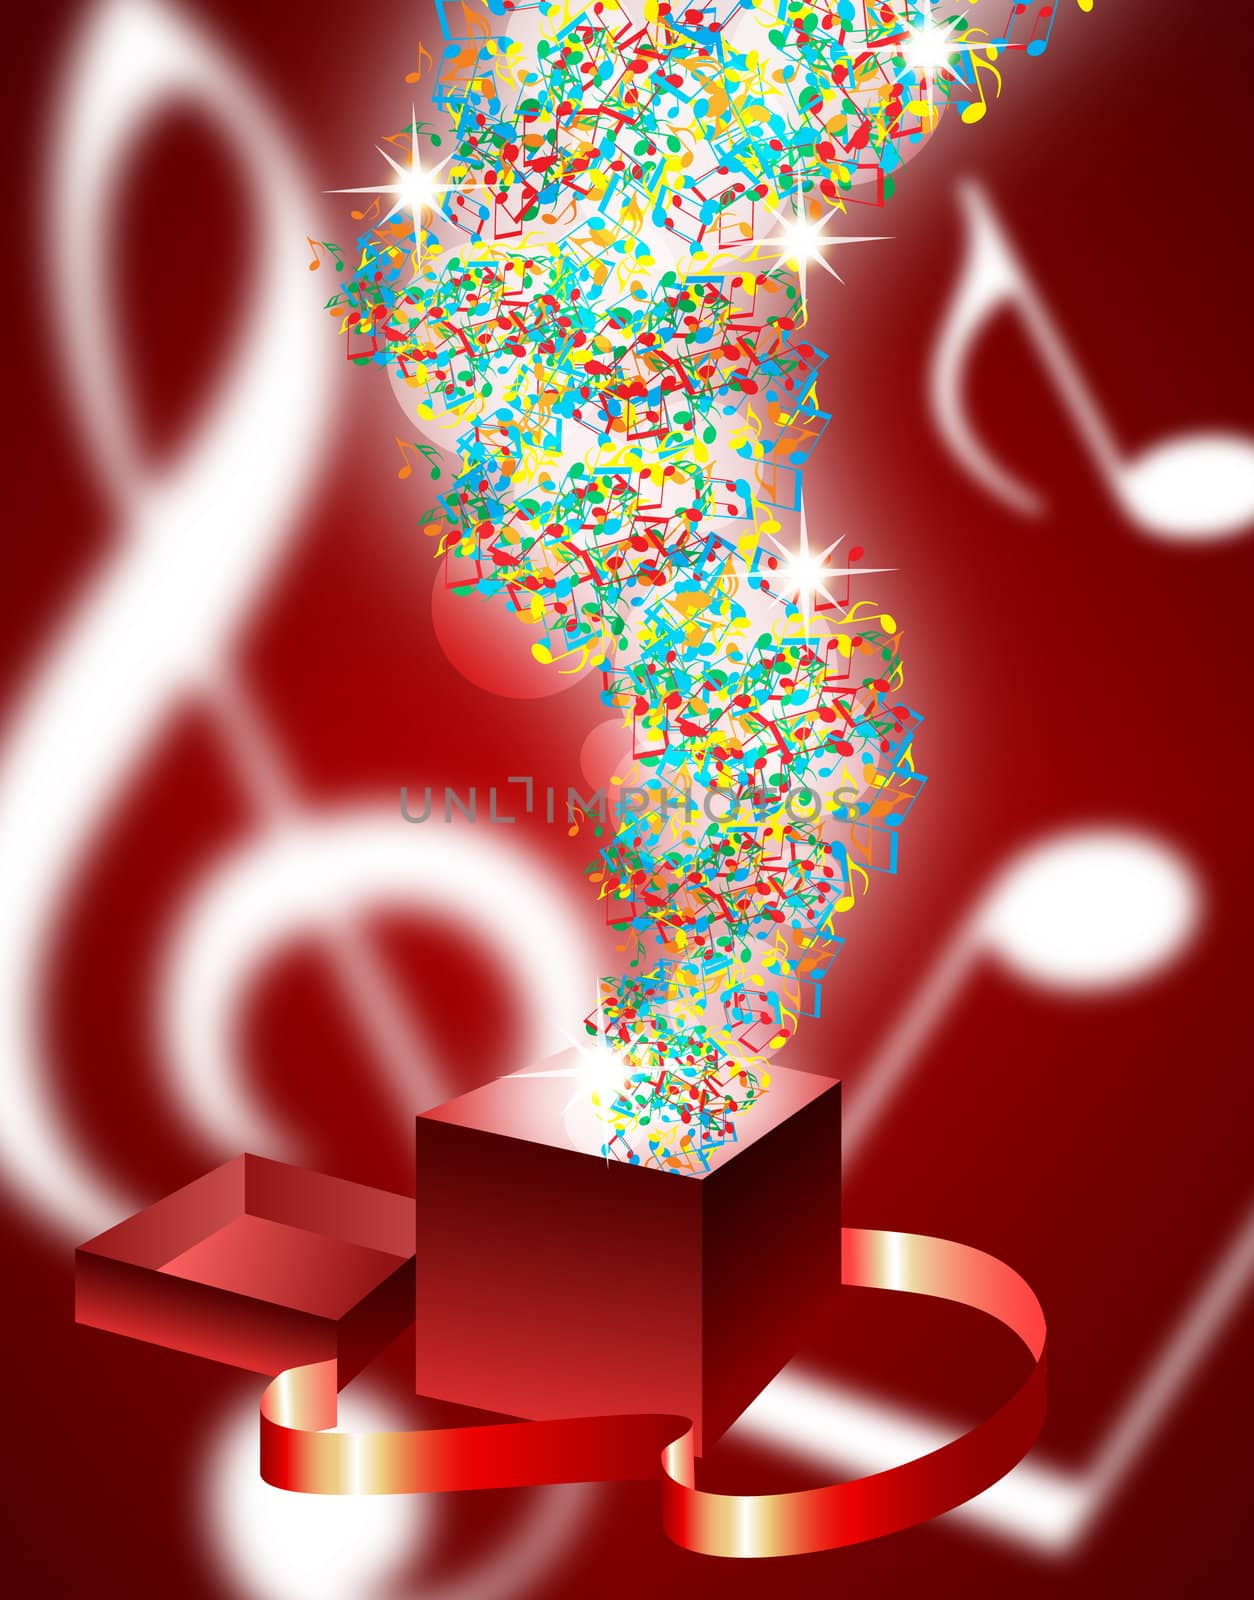 abstract music background with musical notes by svtrotof